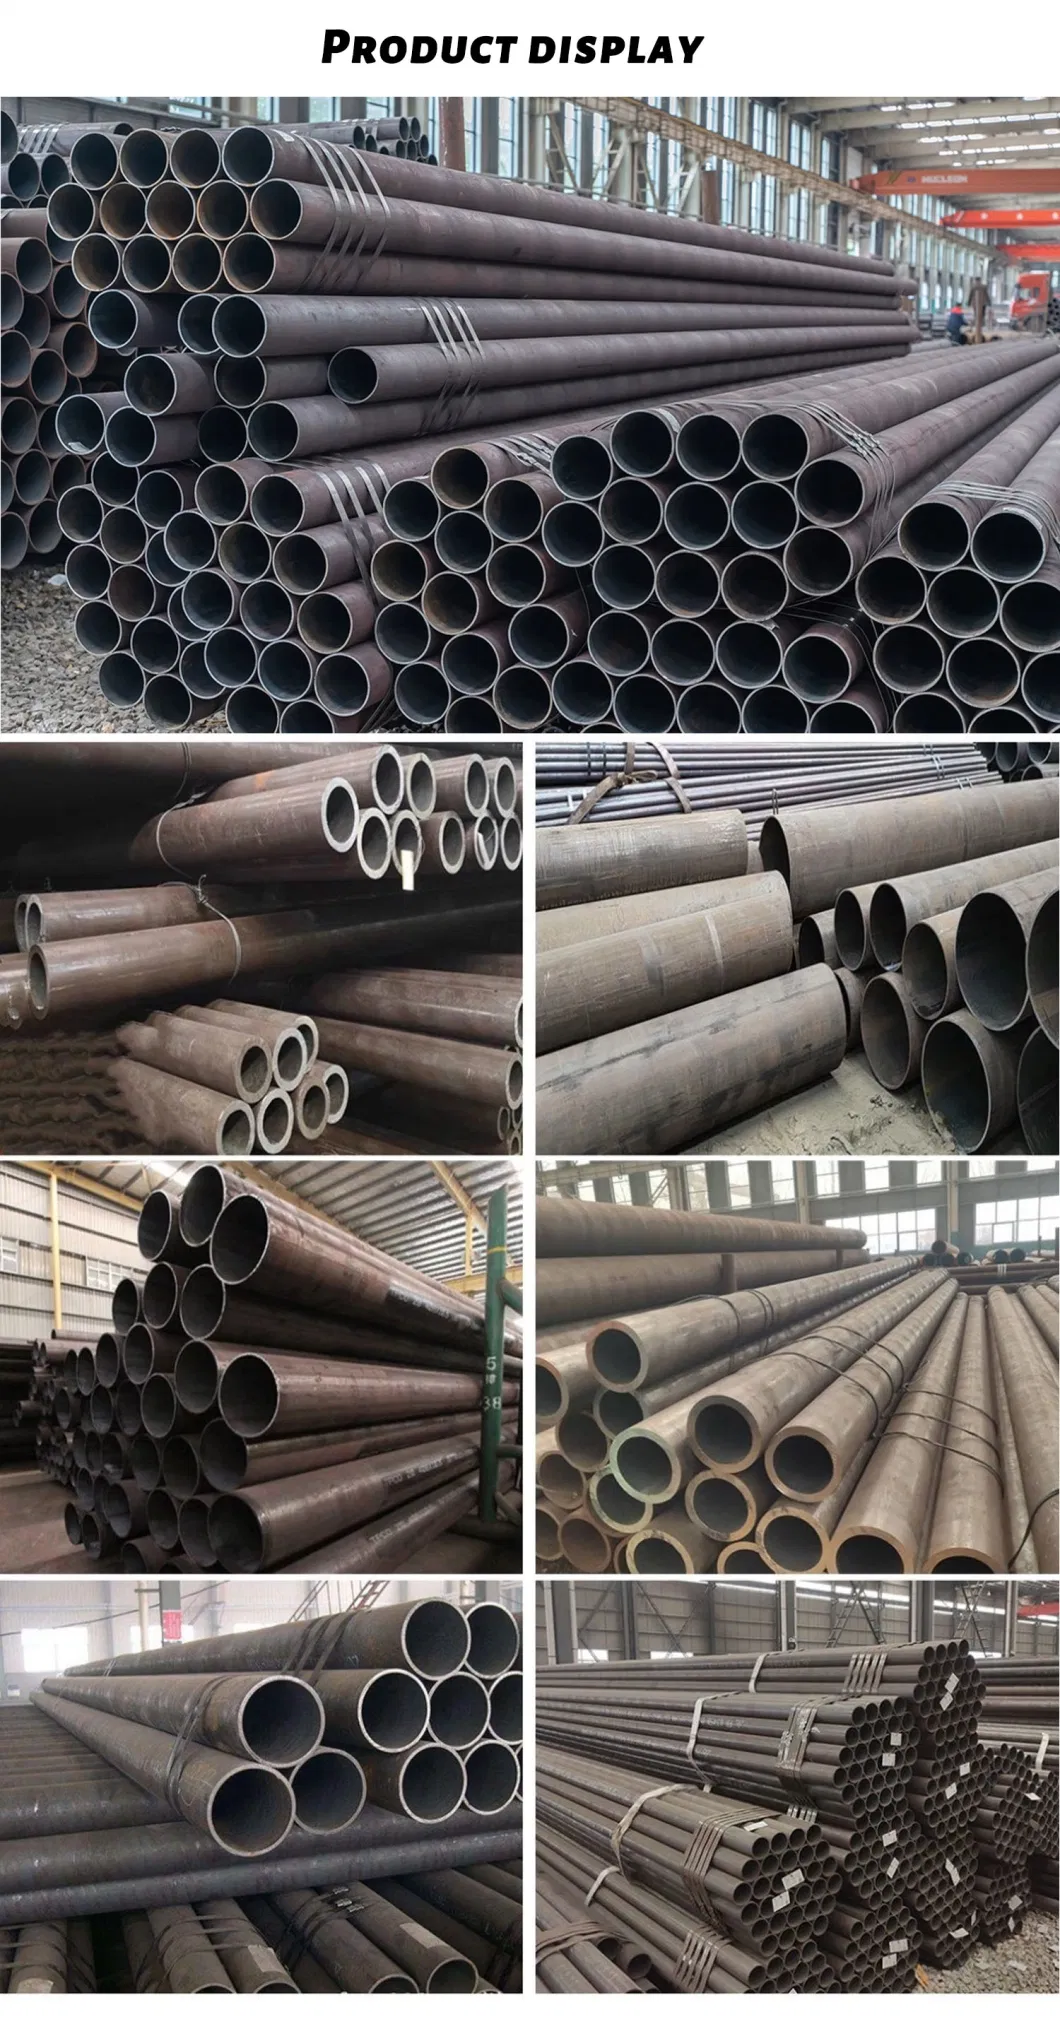 SSAW Pipe ERW Mild Steel SSAW Spiral Welded Pipe for Oil Petroleum ASTM A252 Grade 3 Piling API 5L Gr. B SSAW Steel Pipe